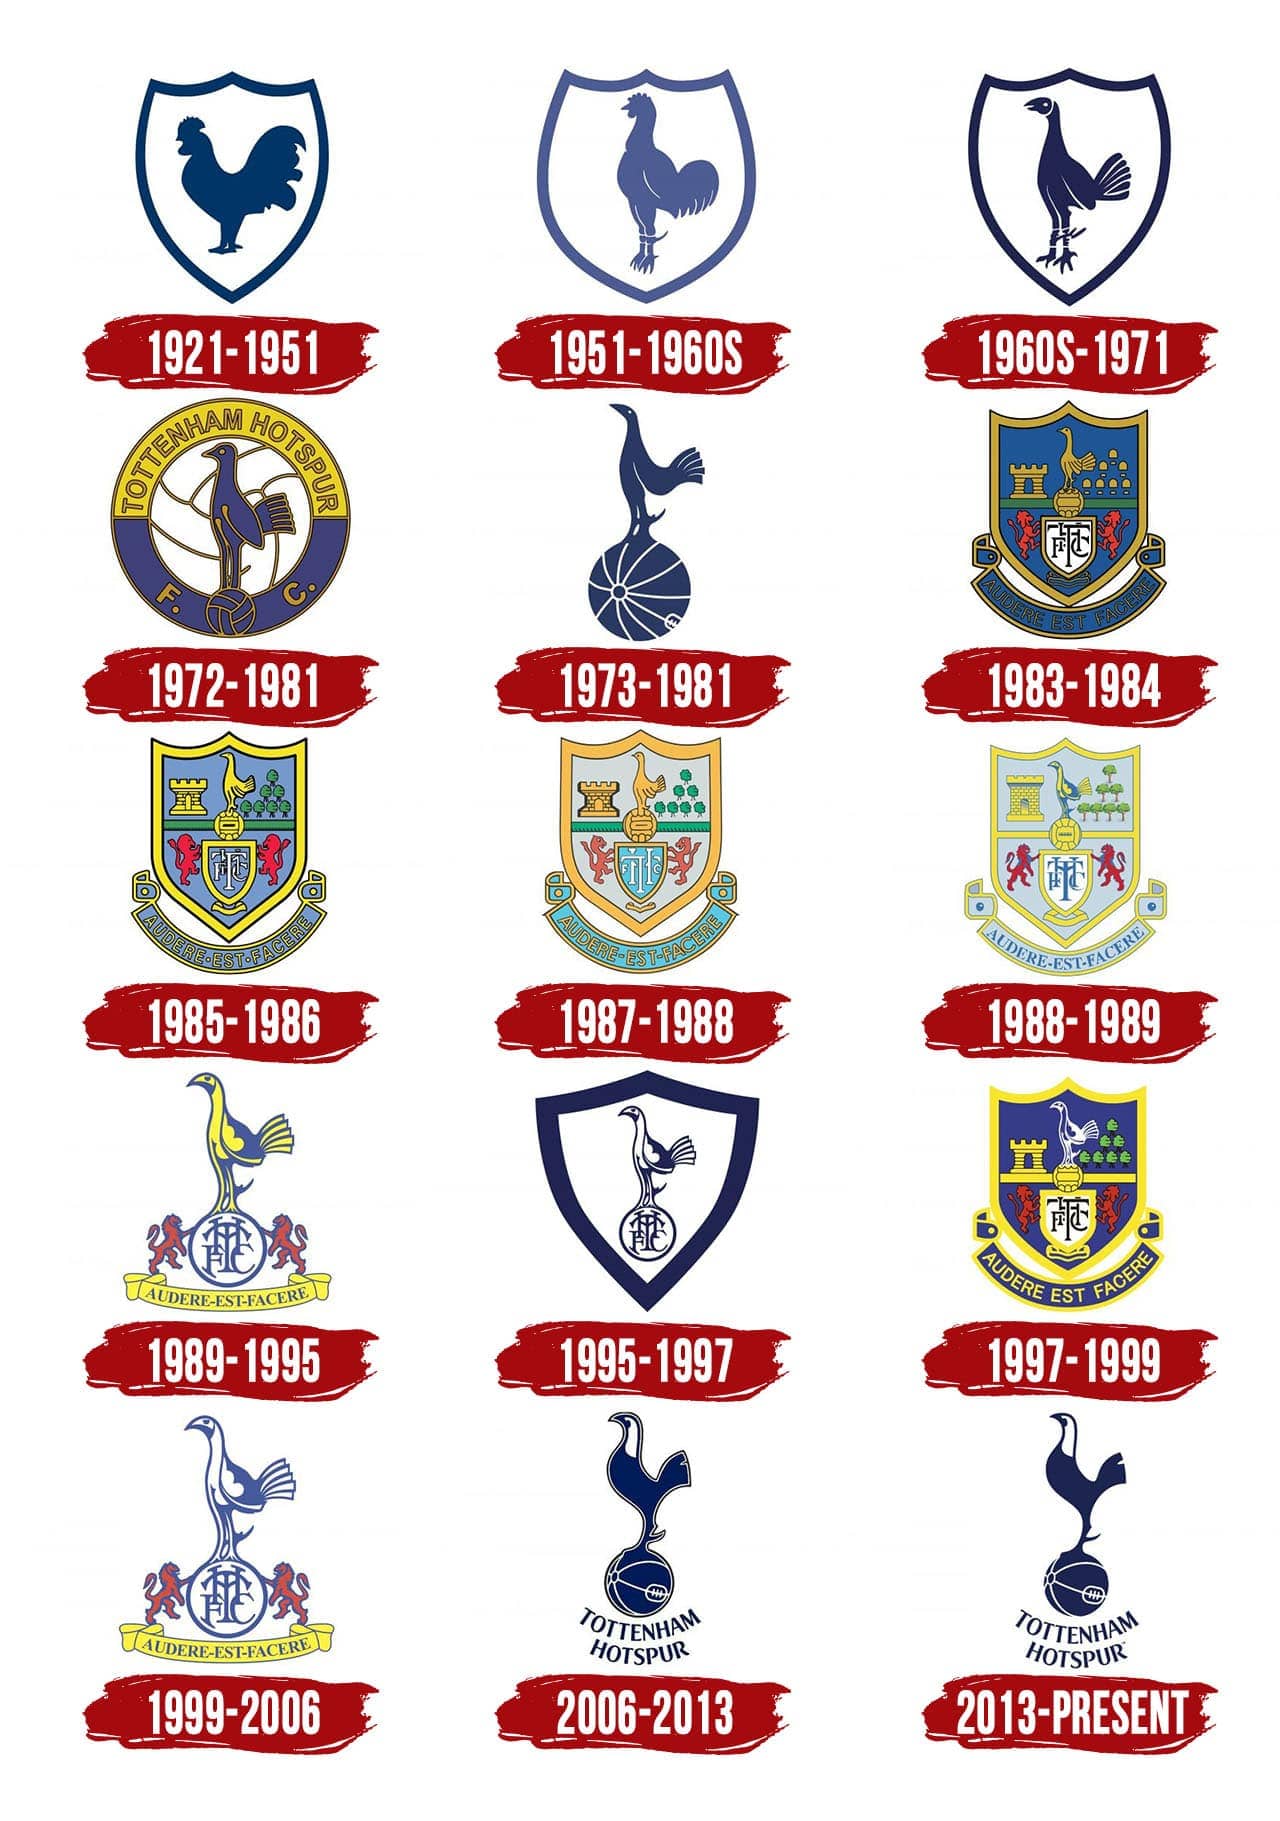 Tottenham Hotspur Logo The Most Famous Brands And Company Logos In The World